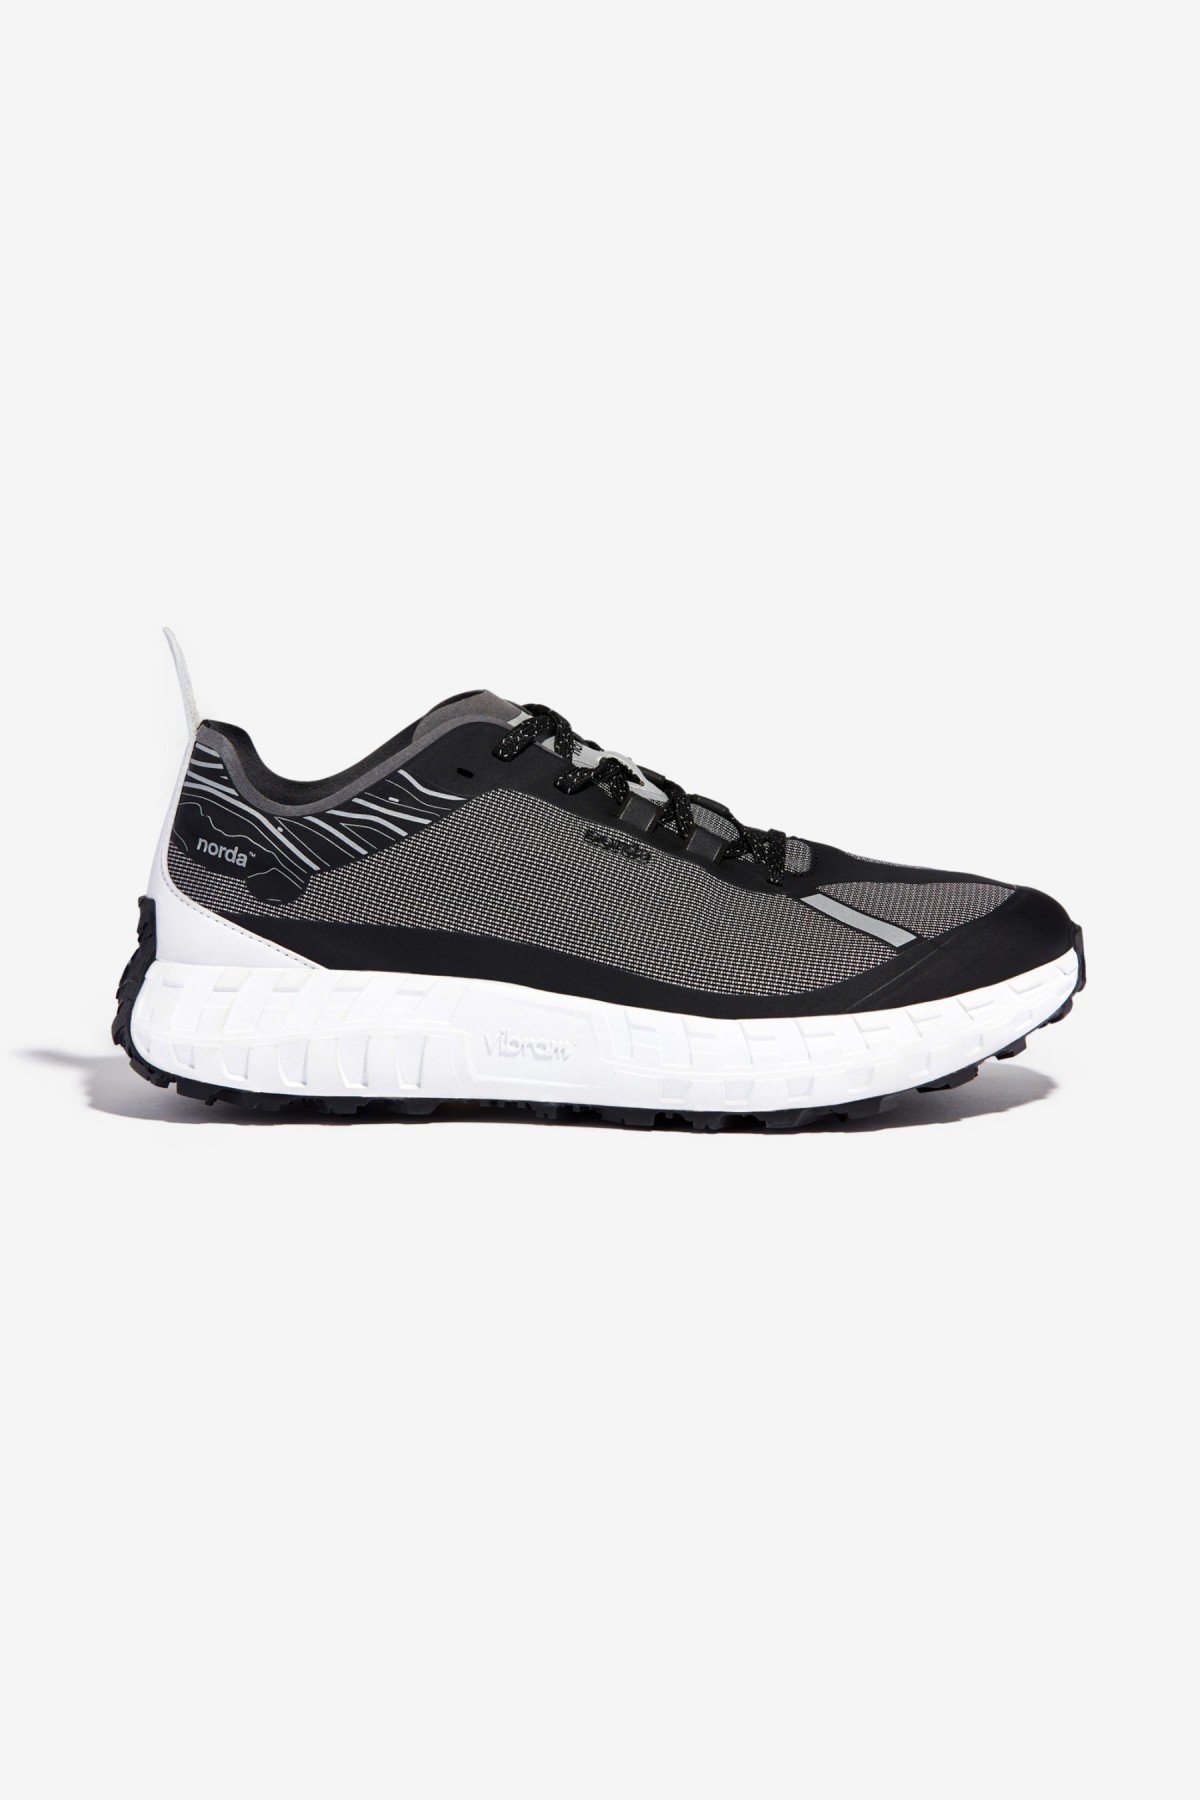 Norda 001 Trail Shoes in Black